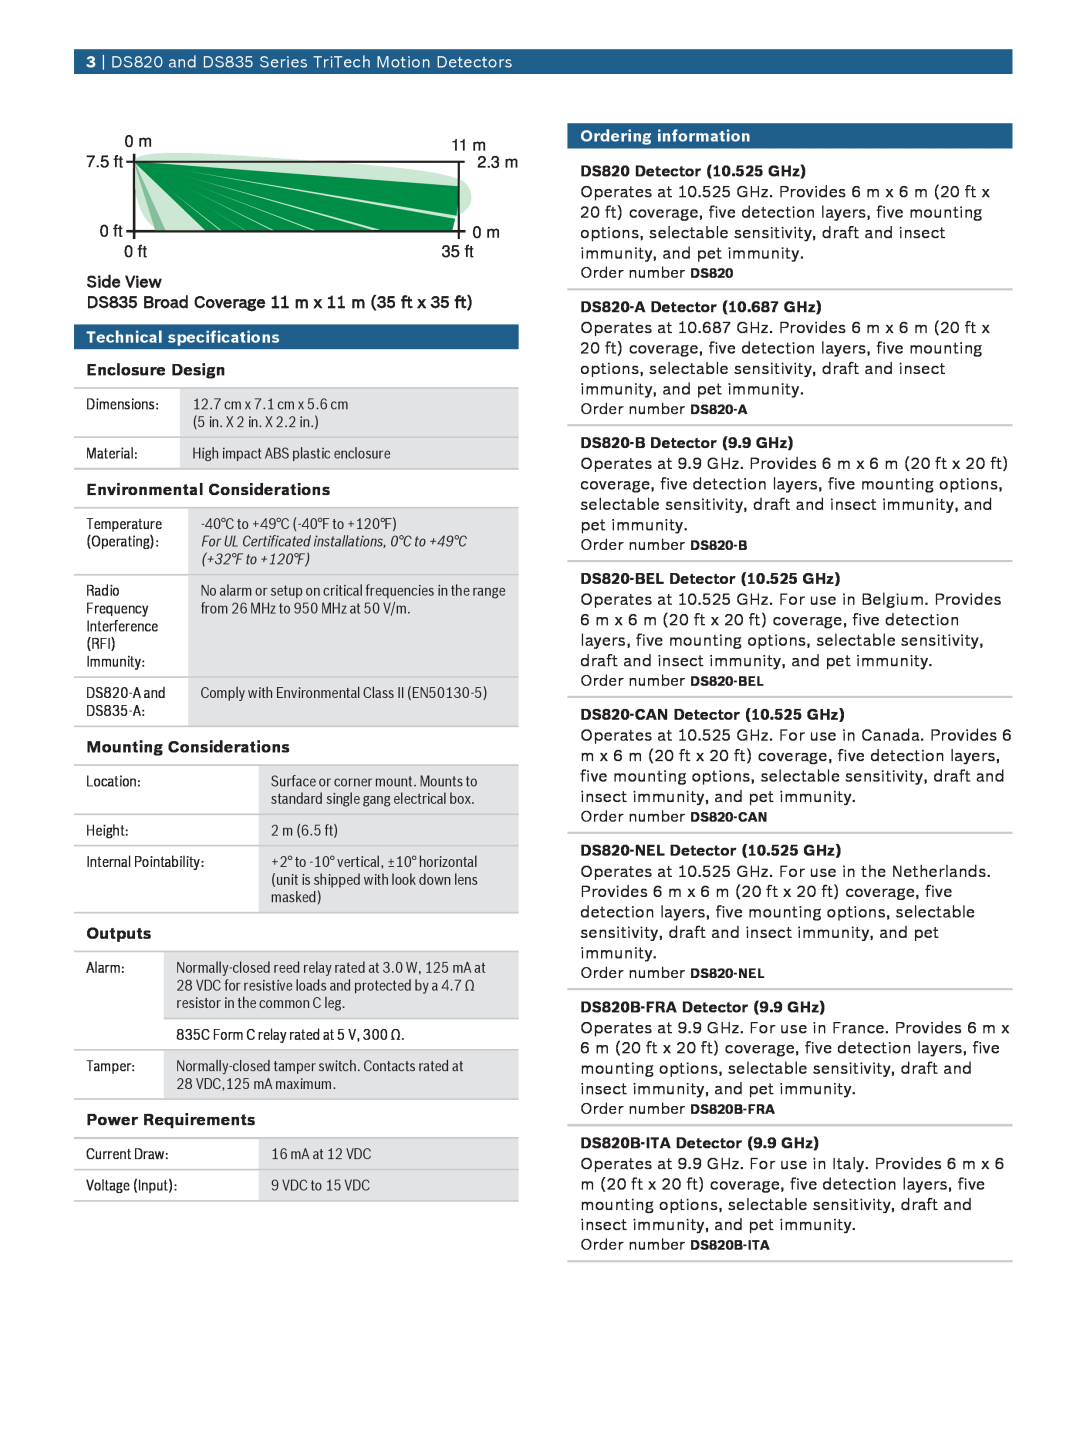 Bosch Appliances DS820 Technical specifications, Enclosure Design, Environmental Considerations, Mounting Considerations 